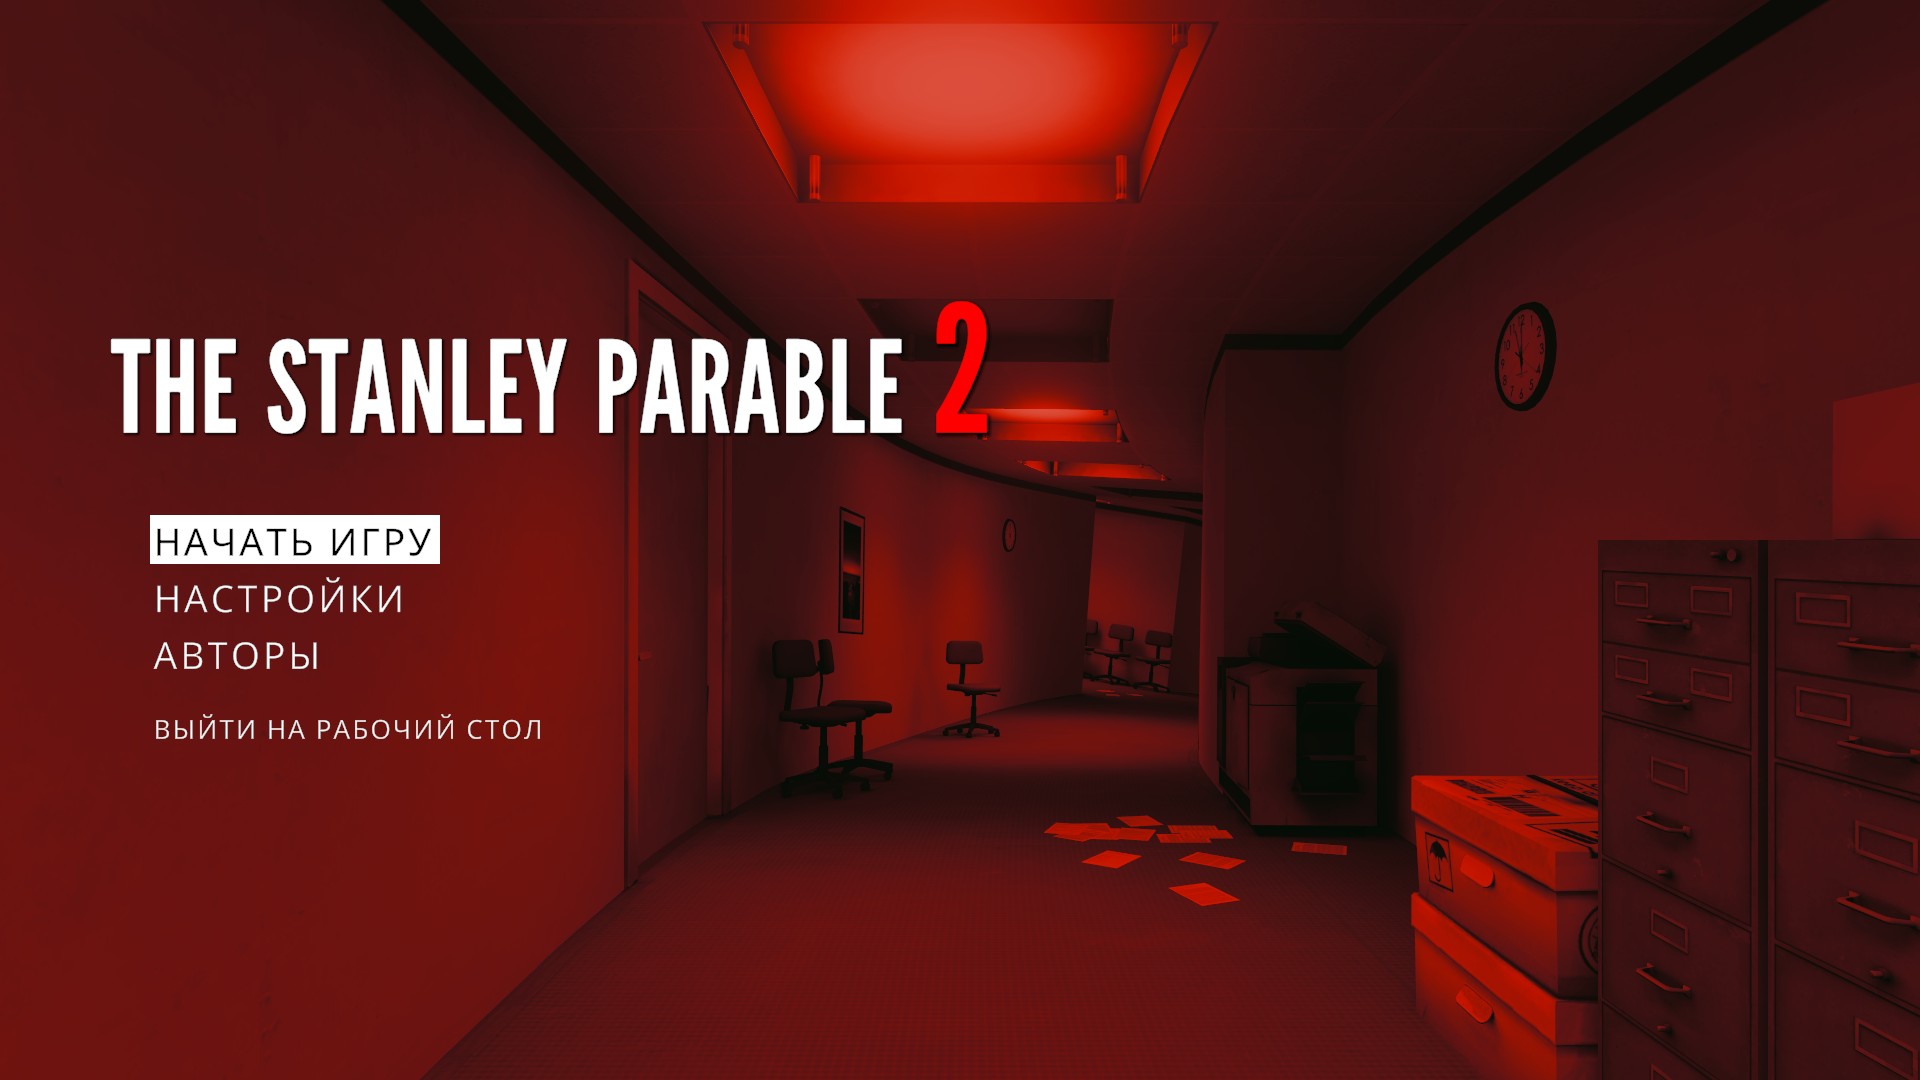 Stanley parable deluxe концовки. The Stanley Parable: Ultra Deluxe. Stanley Parable Ultra Deluxe Art. The Stanley Parable Ultra Deluxe арт. Stanley Parable Ultra Deluxe зона воспоминаний.